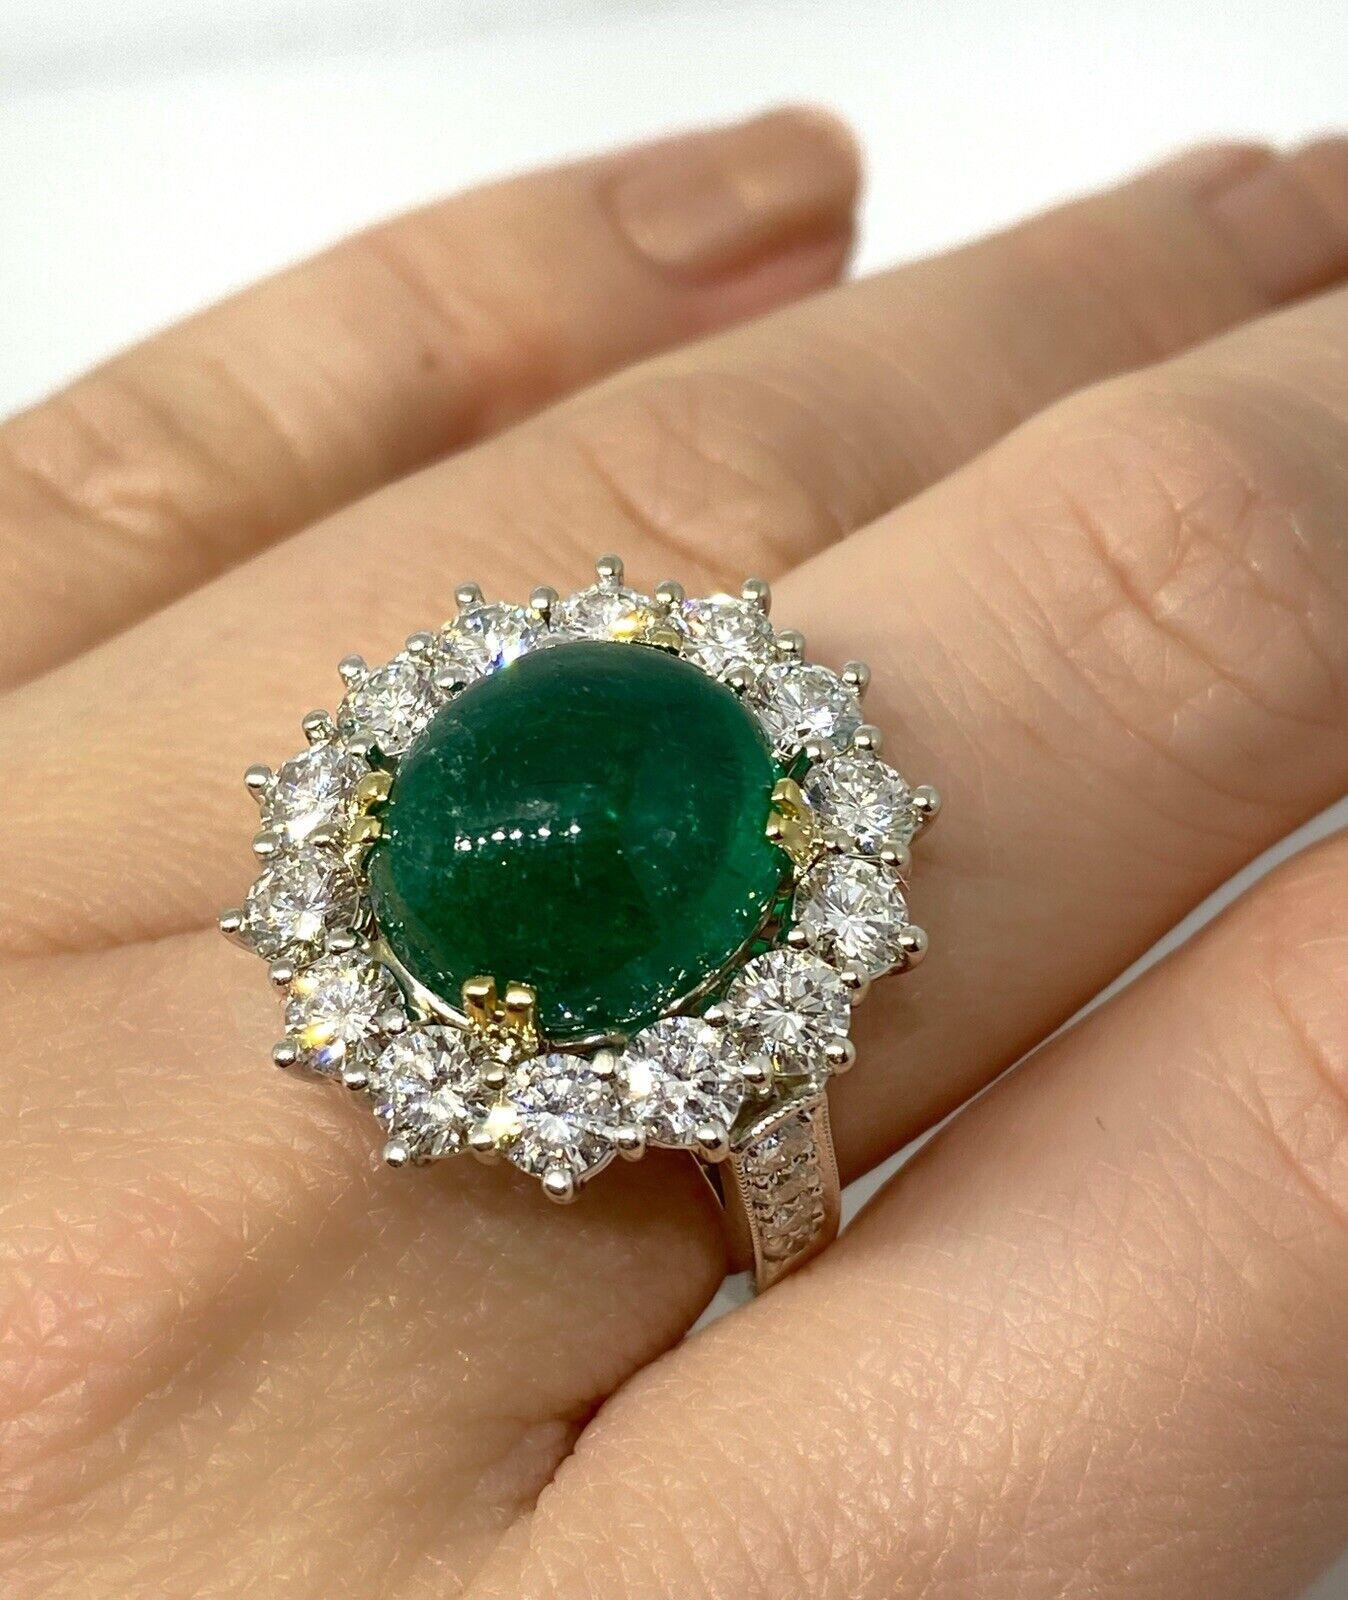 GIA Certified Colombian Emerald Cabochon & Diamond Ring in 18K White Gold

Colombian Emerald and Diamond Ring features a large Oval Emerald Cabochon surrounded by 14 Round Brilliant Diamonds set in 18k White Gold.

The emerald originates from